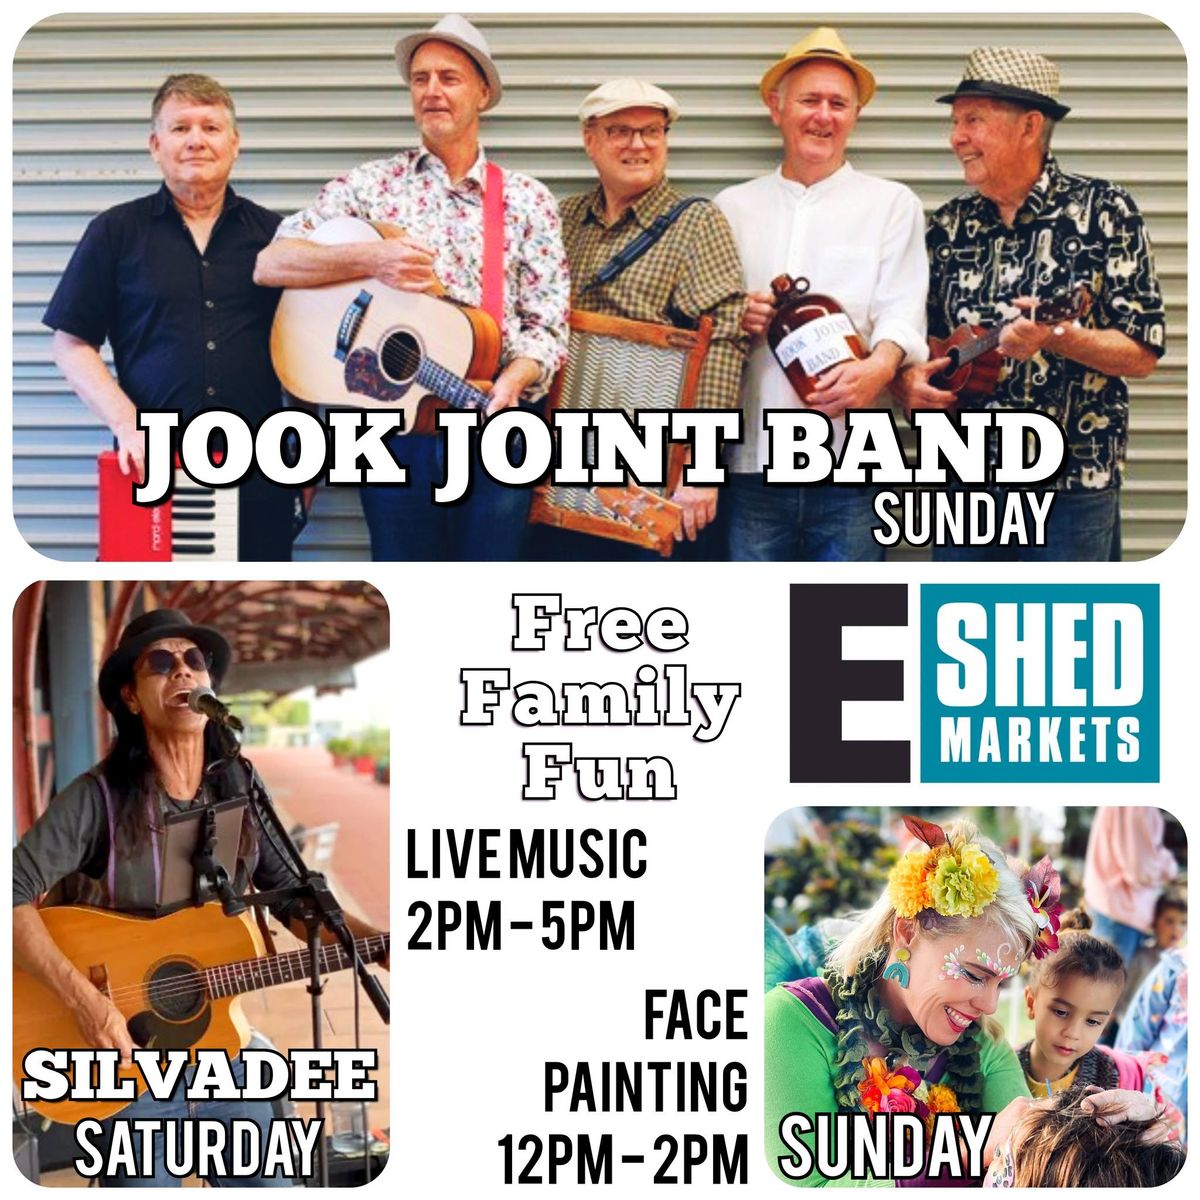 Silvadee, Jook Joint Band AND Face Painting at E SHED!